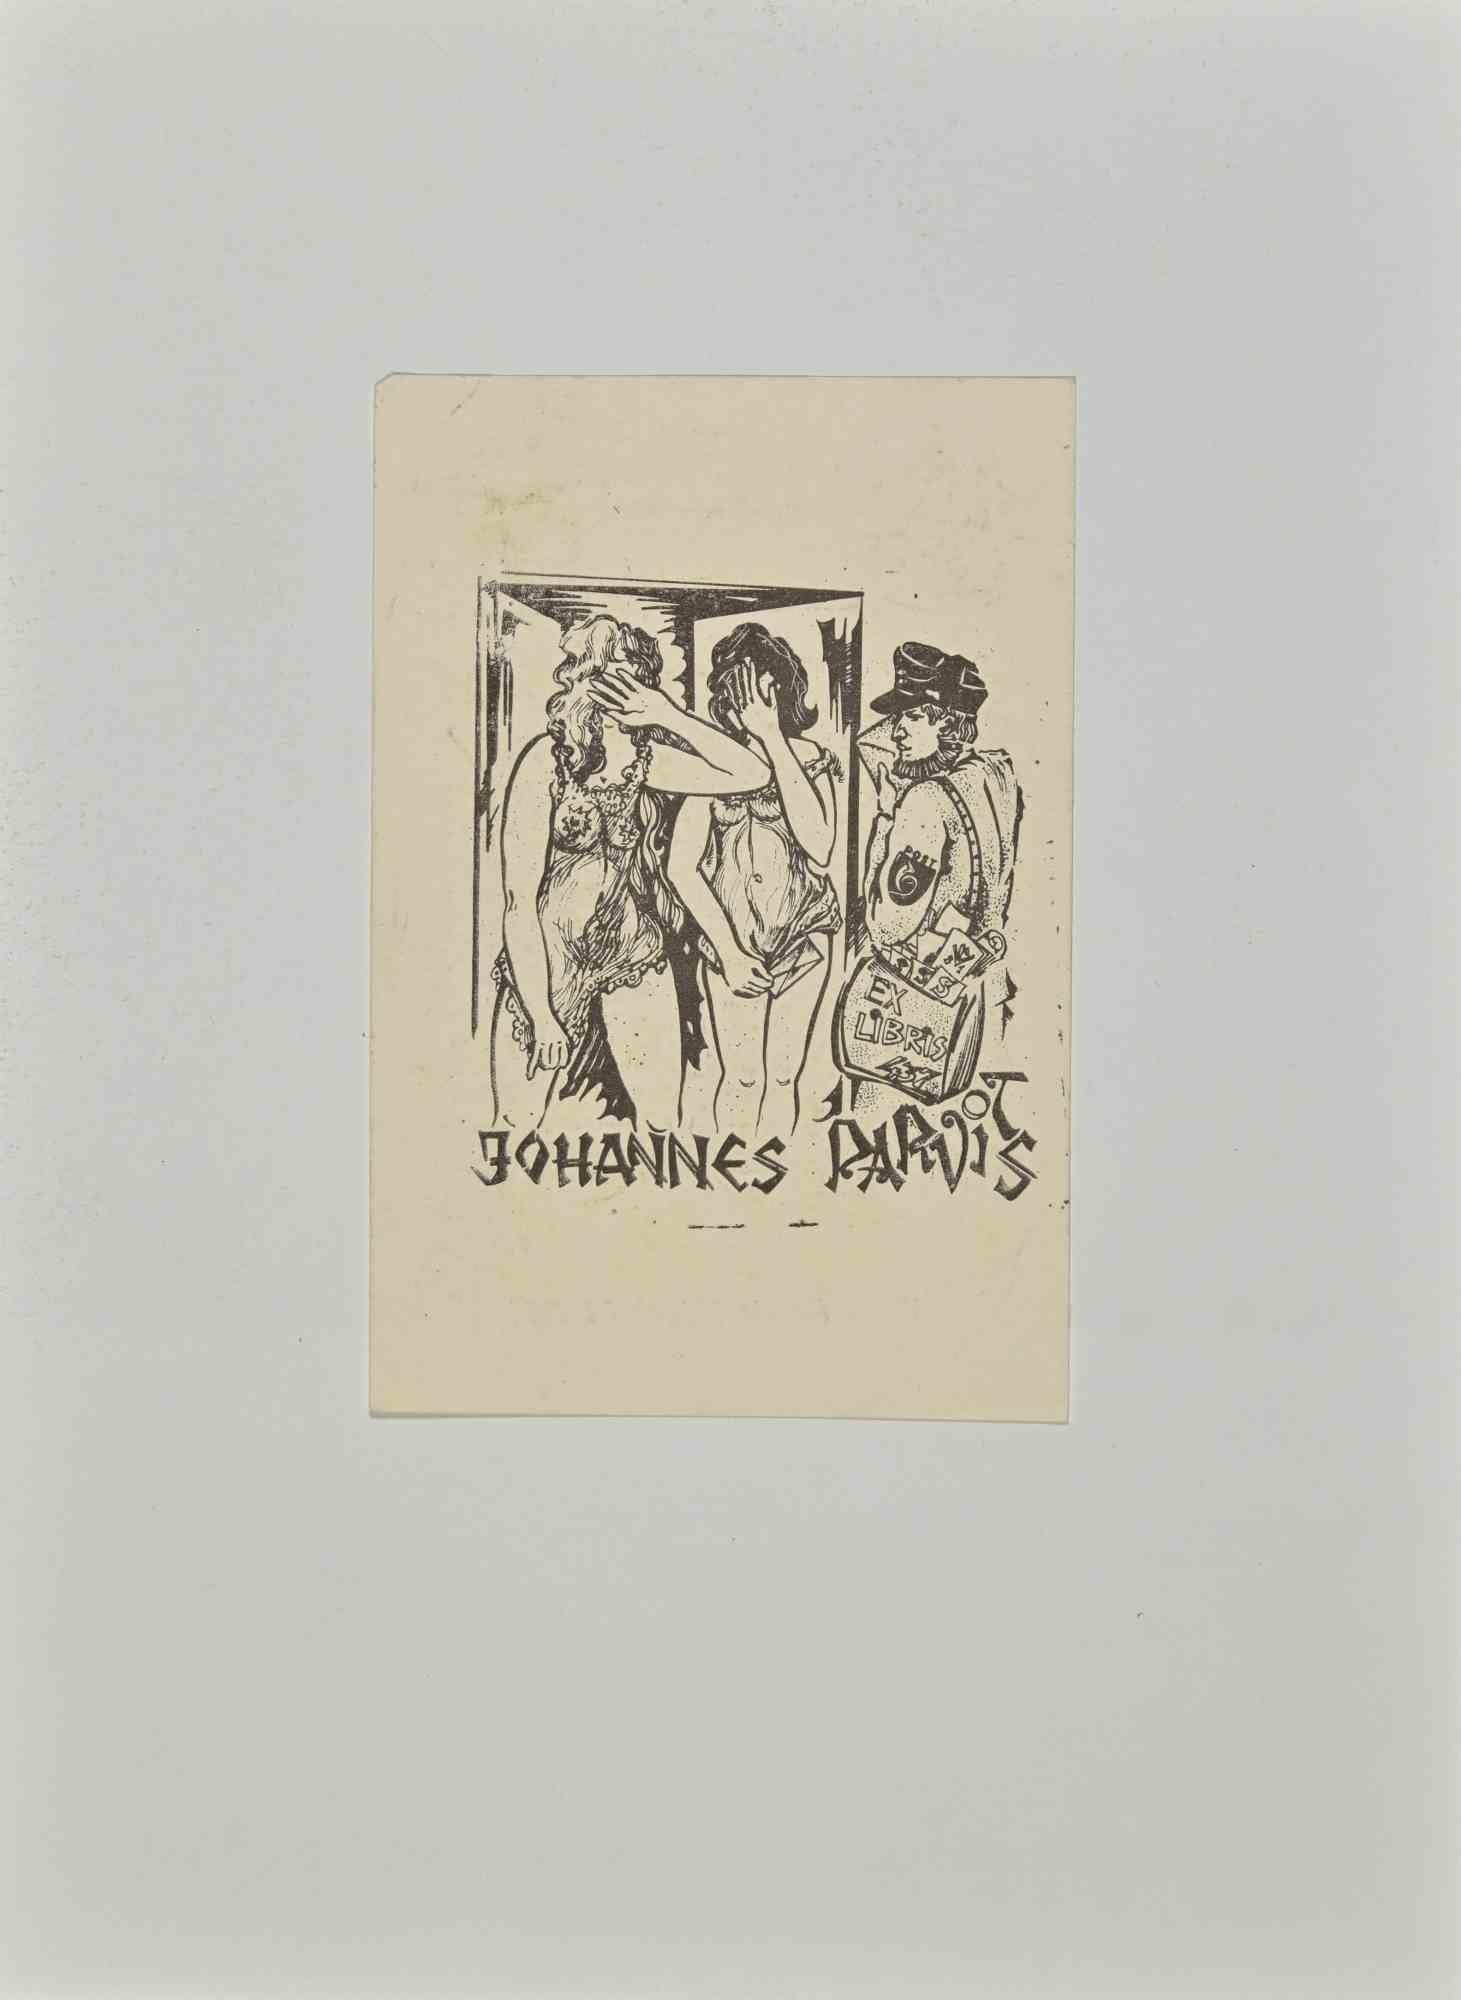 Ex Libris  - Johannes Parvis  is a Modern Artwork realized in 1981 by Vilnis Resnis.

Woodcut on ivory paper. Signed on plate and dated on back.

The work is glued on cardboard.

Total dimensions: 20x 15 cm.

Good conditions.

The artwork represents